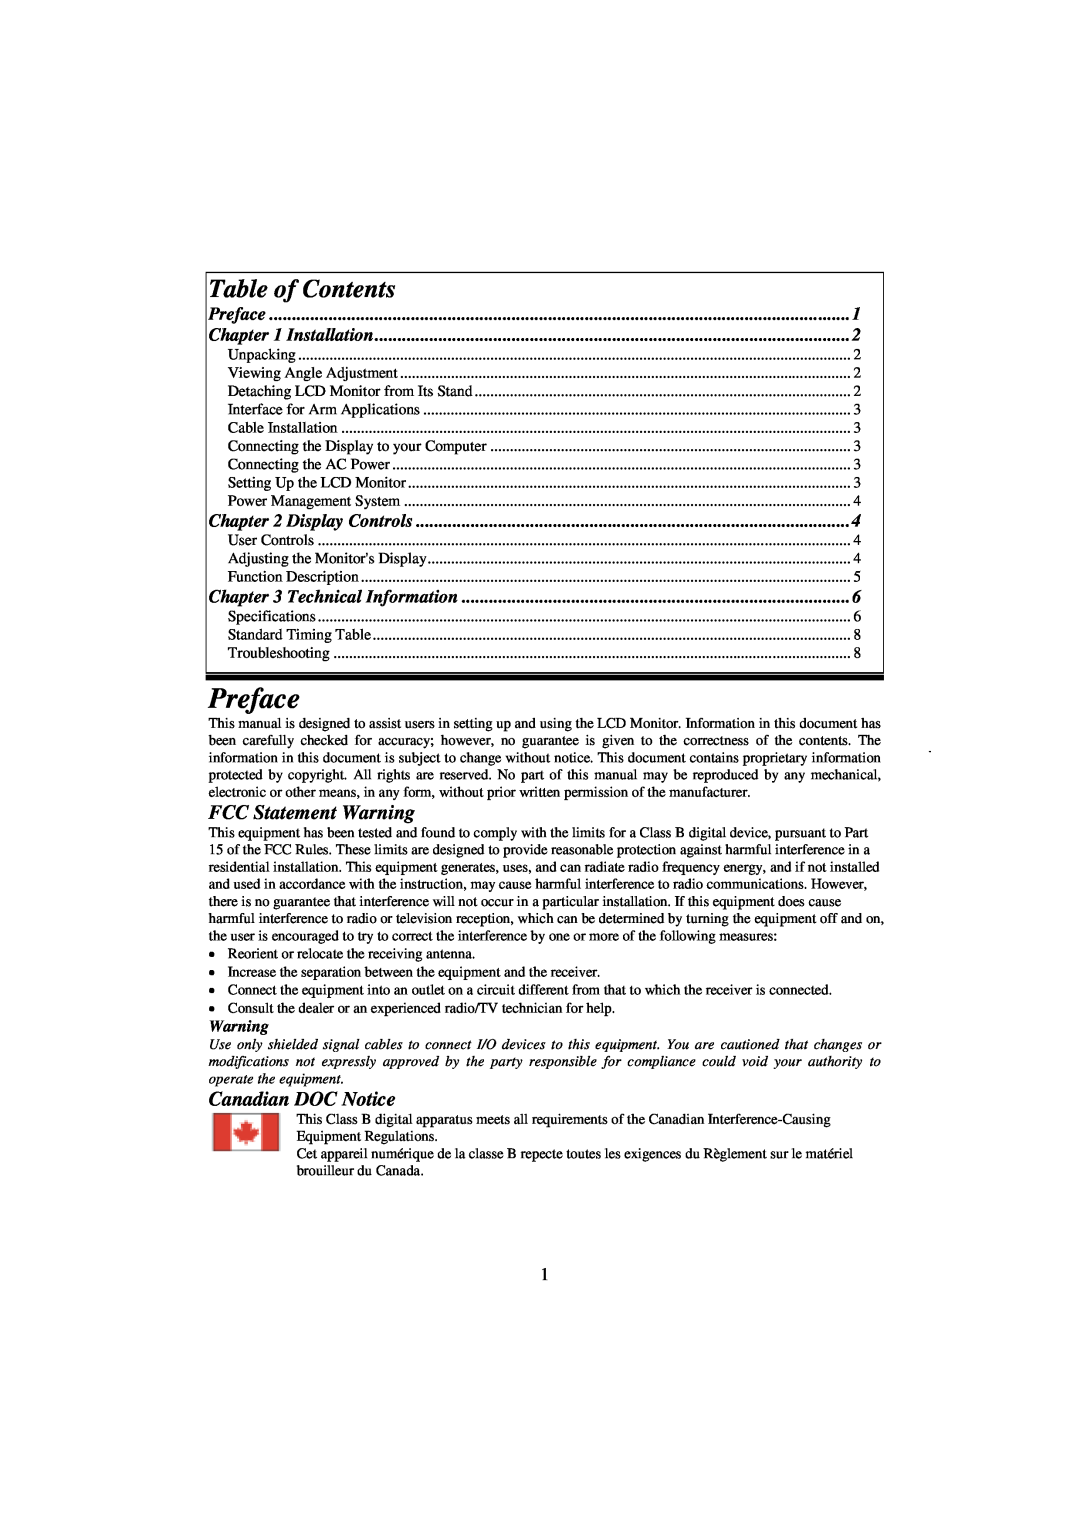 Planar PE190 Preface, FCC Statement Warning, Canadian DOC Notice, Installation, Display Controls, Technical Information 